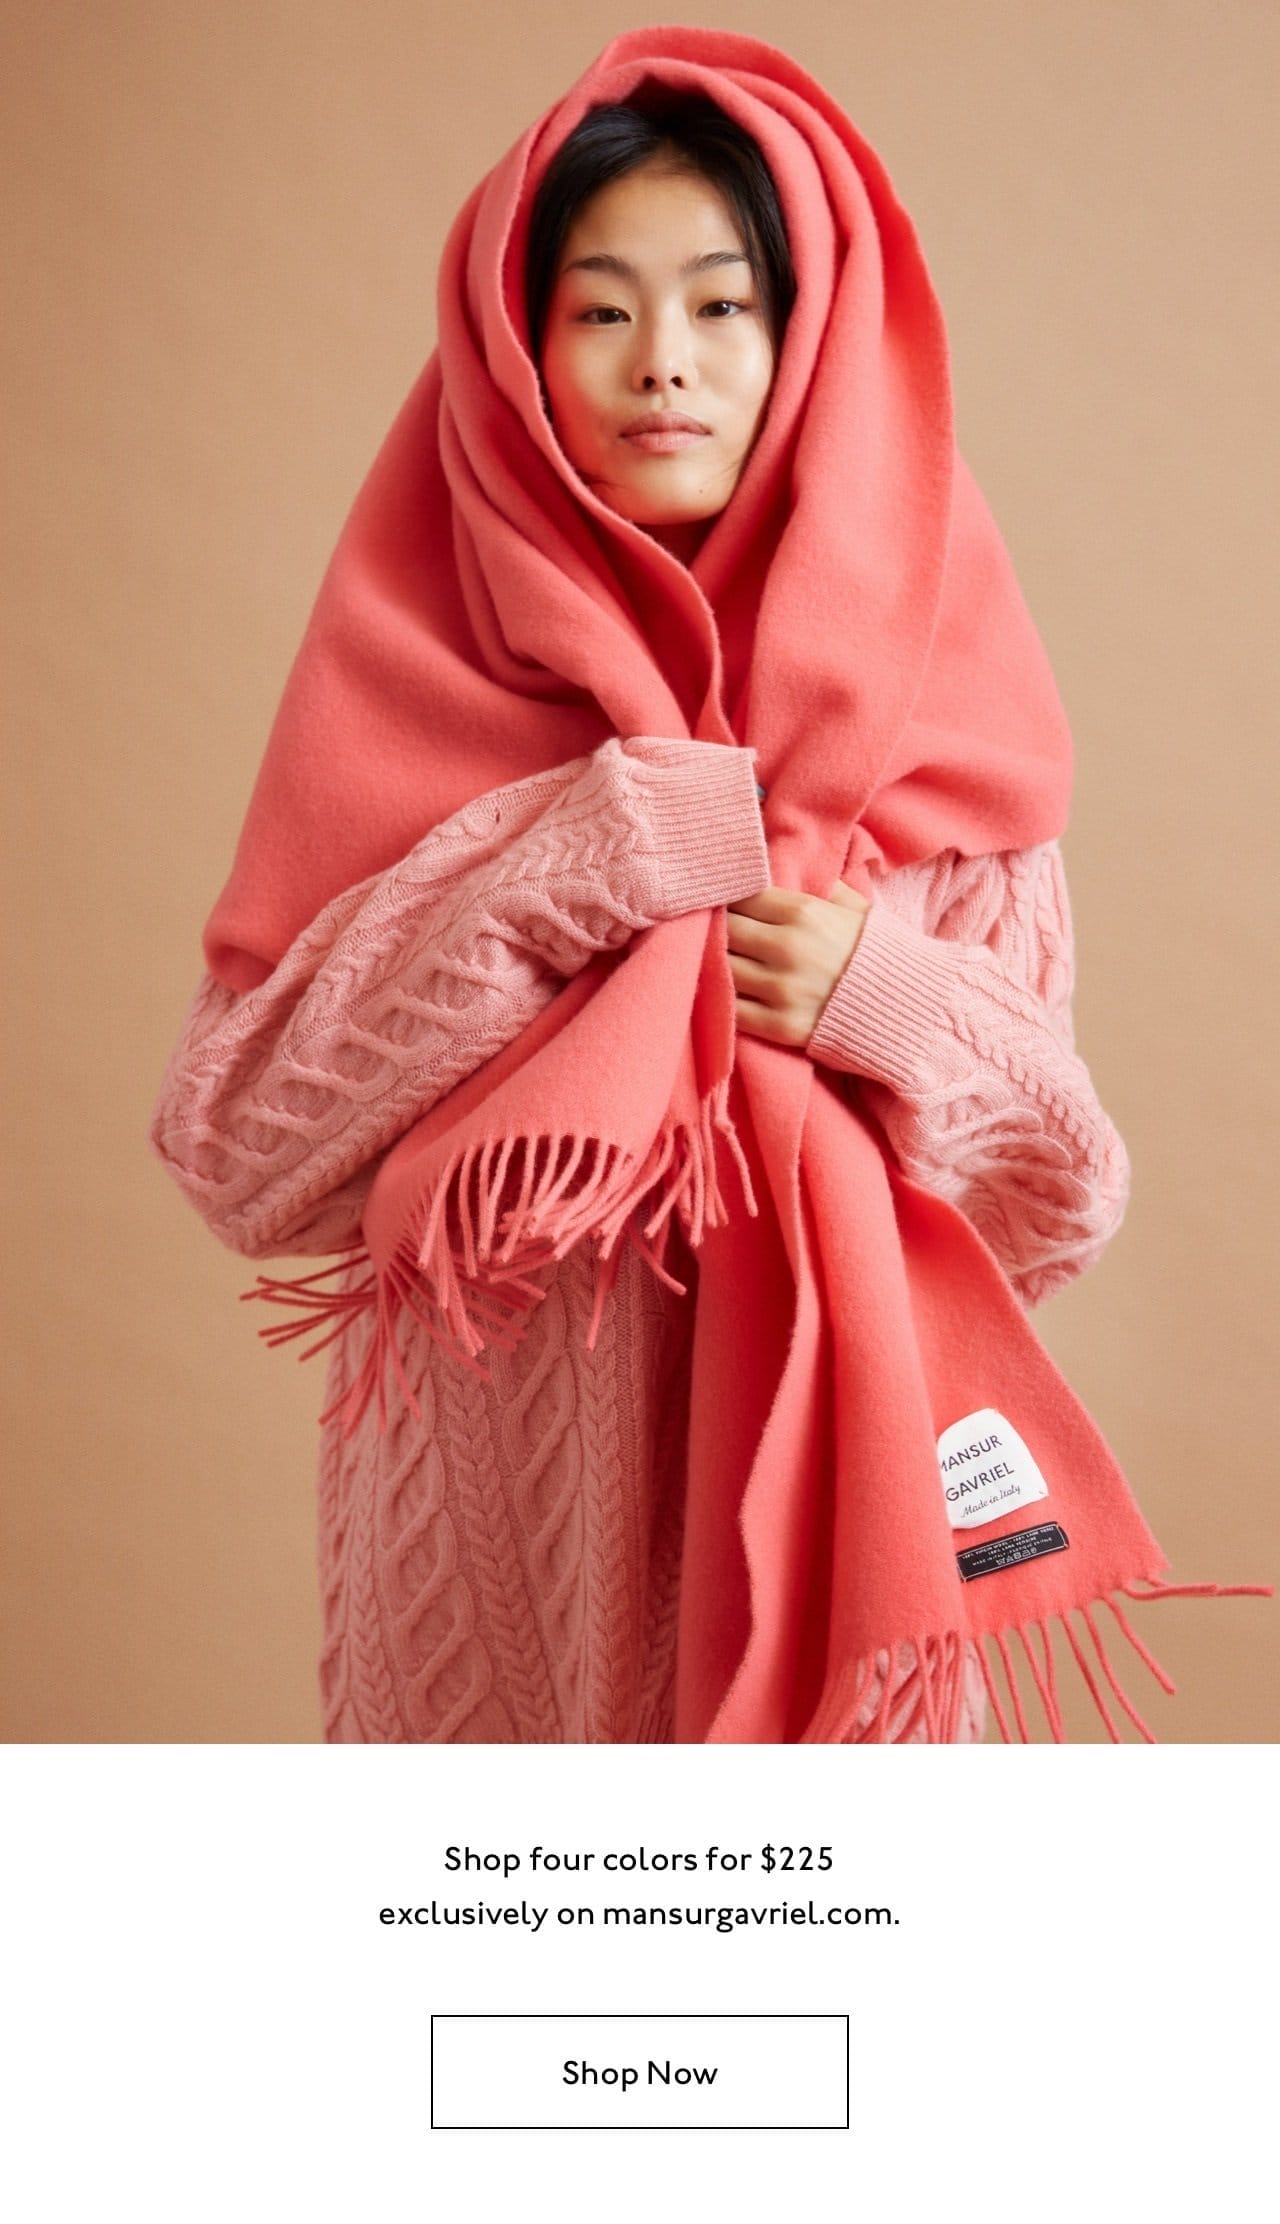 Pictured: our model wearing the Classic Wool Scarf in Flamingo.